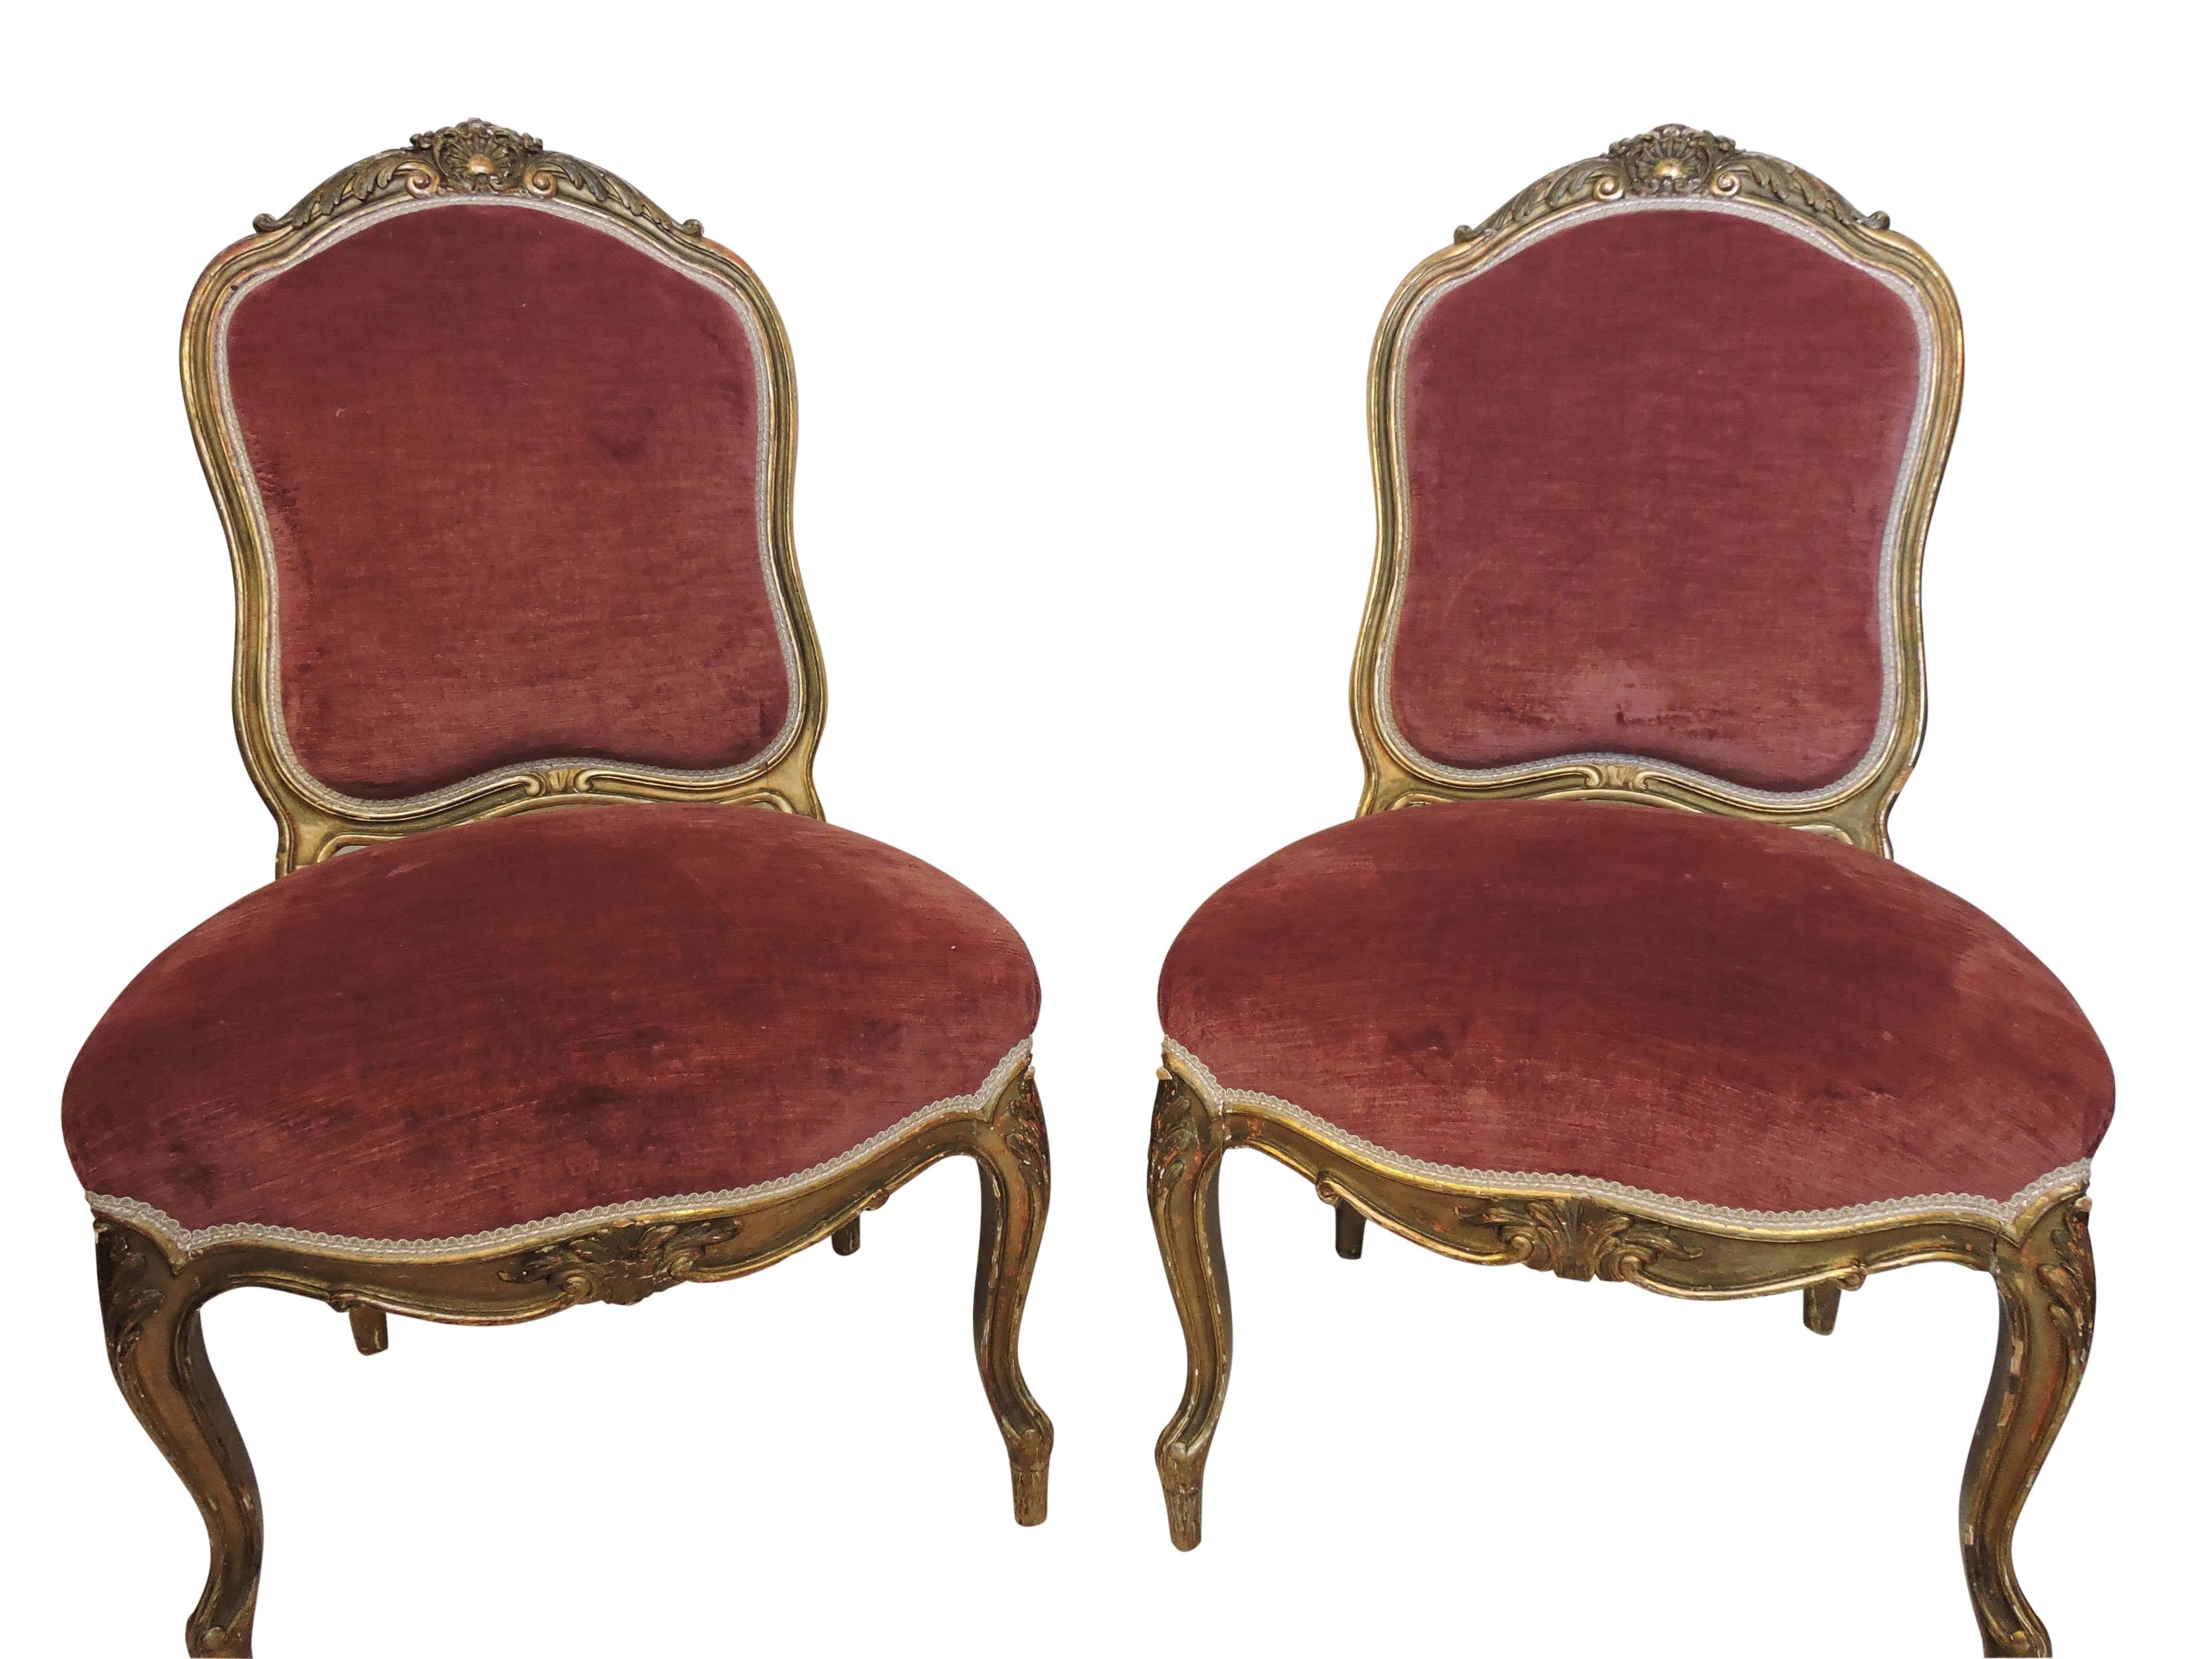 A pair of comfortable and beautiful 19th century Louis XV style slipper chairs, with carved and gilded hardwood frames, cabriole legs and newer rose velvet upholstery, front and back.
The hardwood frames are gilded inside and out and are further